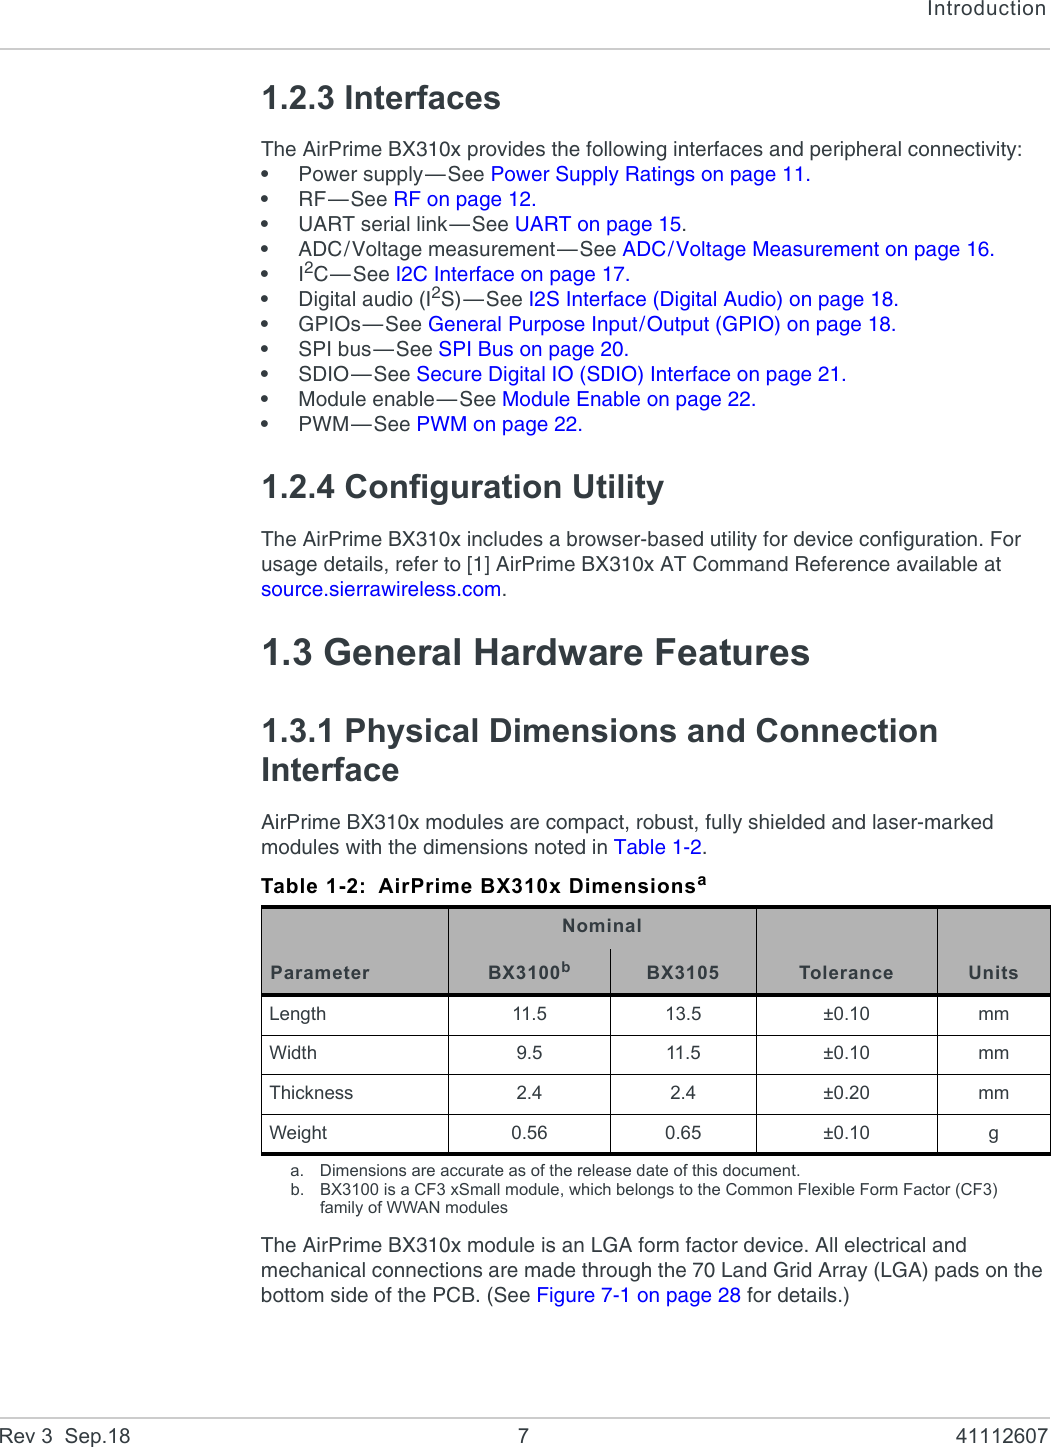 IntroductionRev 3  Sep.18 7 411126071.2.3 InterfacesThe AirPrime BX310x provides the following interfaces and peripheral connectivity:•Power supply—See Power Supply Ratings on page 11.•RF—See RF on page 12.•UART serial link—See UART on page 15.•ADC/Voltage measurement—See ADC/Voltage Measurement on page 16.•I2C—See I2C Interface on page 17.•Digital audio (I2S)—See I2S Interface (Digital Audio) on page 18.•GPIOs—See General Purpose Input/Output (GPIO) on page 18.•SPI bus—See SPI Bus on page 20.•SDIO—See Secure Digital IO (SDIO) Interface on page 21.•Module enable—See Module Enable on page 22.•PWM—See PWM on page 22.1.2.4 Configuration UtilityThe AirPrime BX310x includes a browser-based utility for device configuration. For usage details, refer to [1] AirPrime BX310x AT Command Reference available at source.sierrawireless.com.1.3 General Hardware Features1.3.1 Physical Dimensions and Connection InterfaceAirPrime BX310x modules are compact, robust, fully shielded and laser-marked modules with the dimensions noted in Table 1-2.The AirPrime BX310x module is an LGA form factor device. All electrical and mechanical connections are made through the 70 Land Grid Array (LGA) pads on the bottom side of the PCB. (See Figure 7-1 on page 28 for details.)Table 1-2: AirPrime BX310x Dimensionsaa. Dimensions are accurate as of the release date of this document.ParameterNominalTolerance UnitsBX3100bb. BX3100 is a CF3 xSmall module, which belongs to the Common Flexible Form Factor (CF3) family of WWAN modulesBX3105Length 11.5 13.5 ±0.10 mmWidth 9.5 11.5 ±0.10 mmThickness 2.4 2.4 ±0.20 mmWeight 0.56 0.65 ±0.10 g